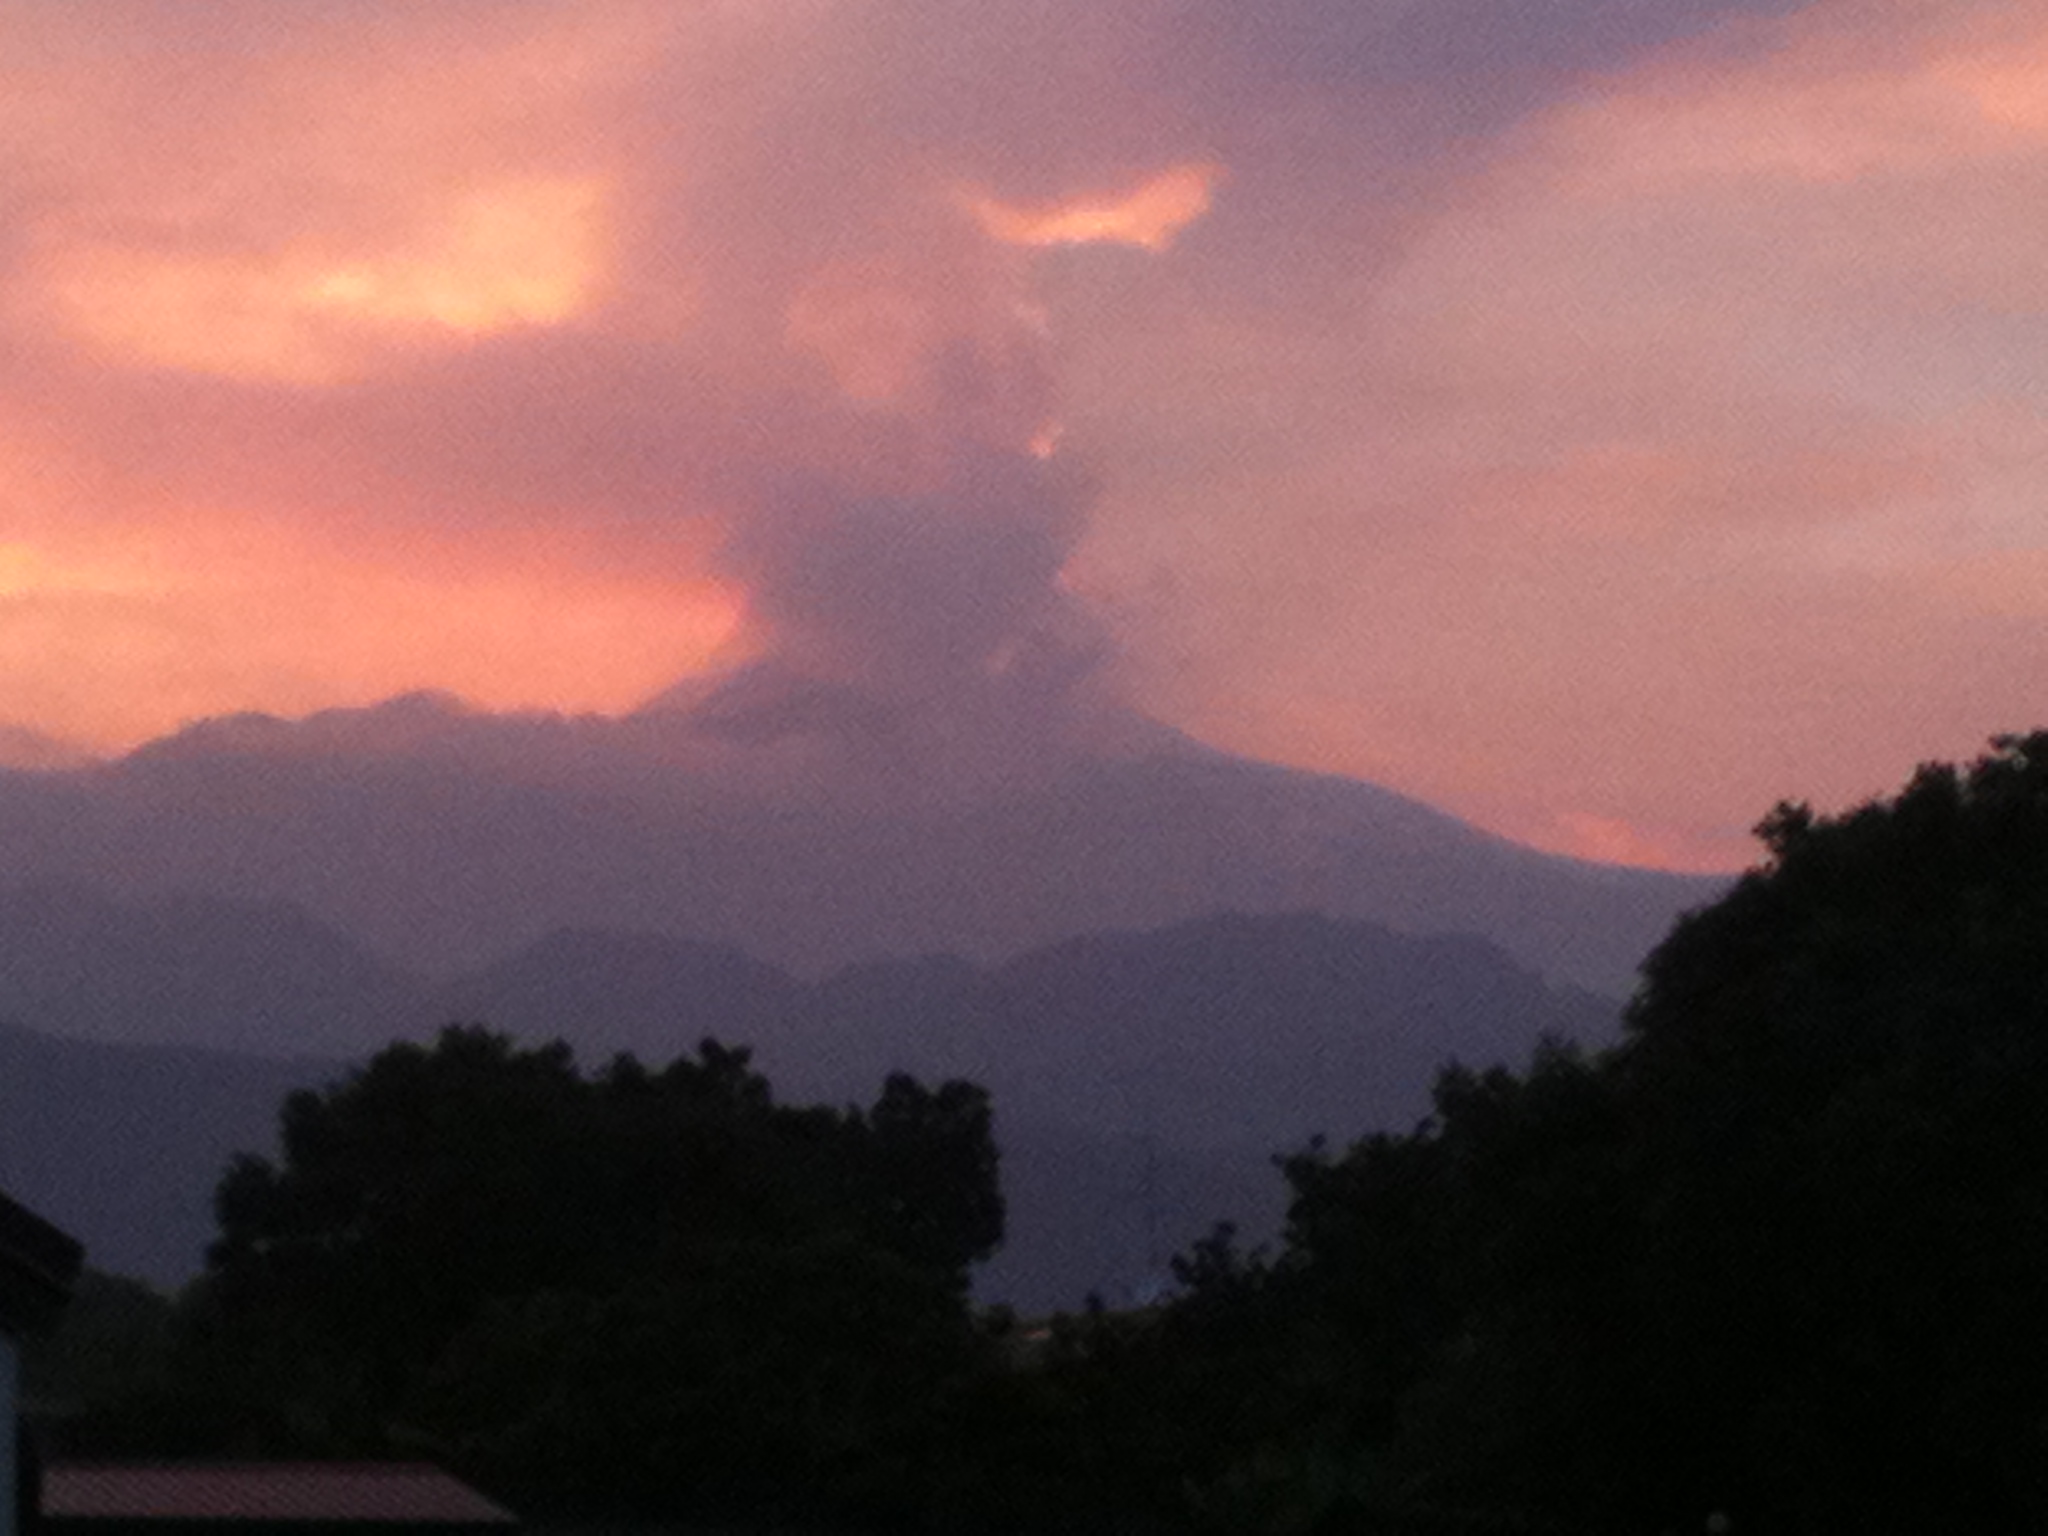 Mount Etna, the volcano visible from the Theological Academy